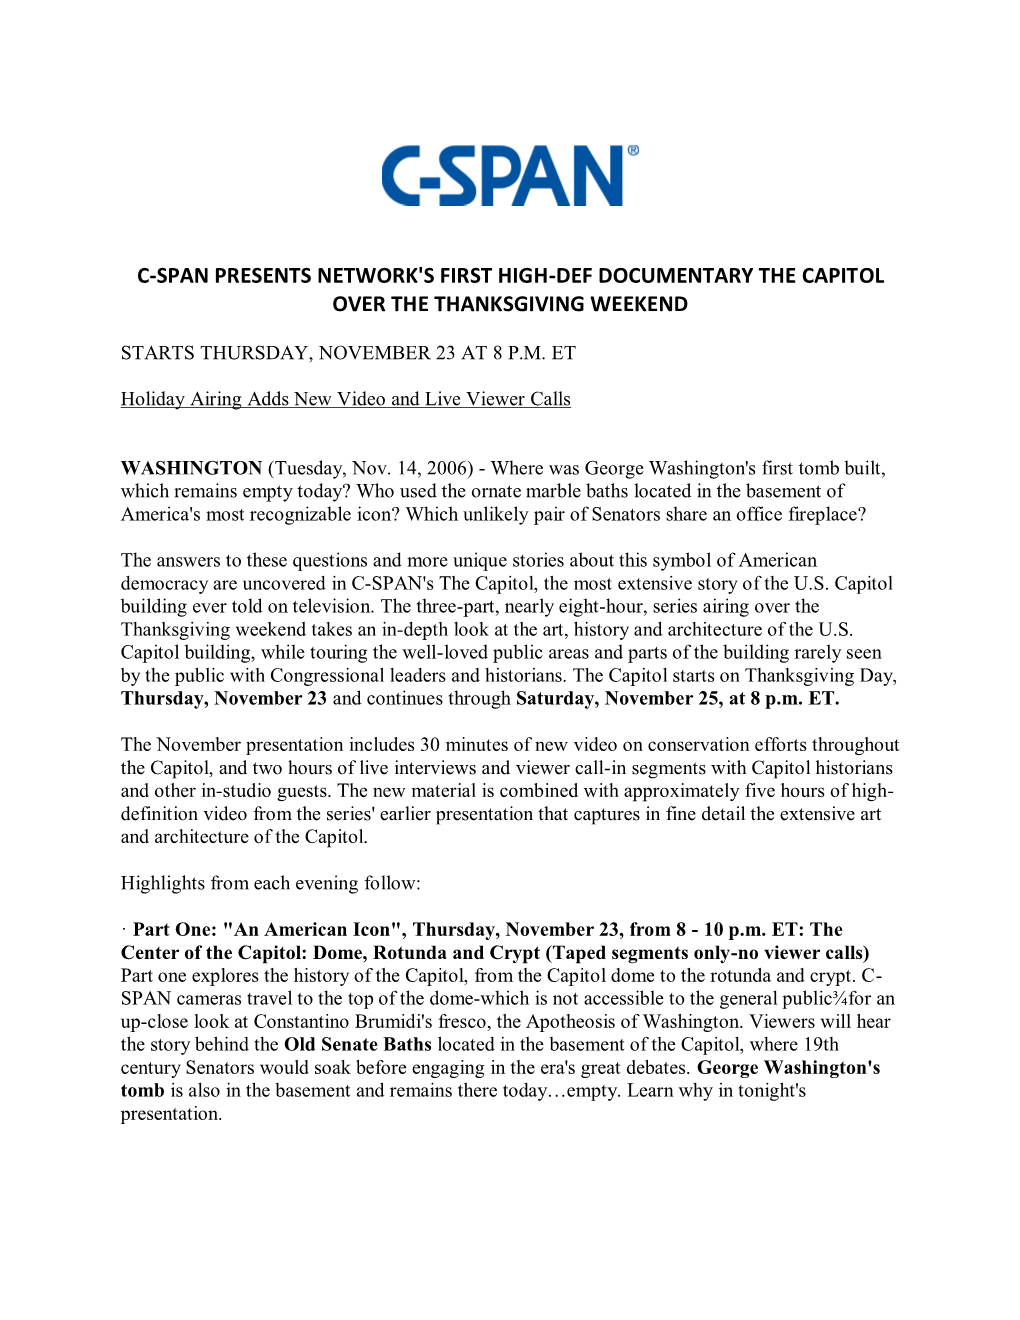 C-Span Presents Network's First High-Def Documentary the Capitol Over the Thanksgiving Weekend